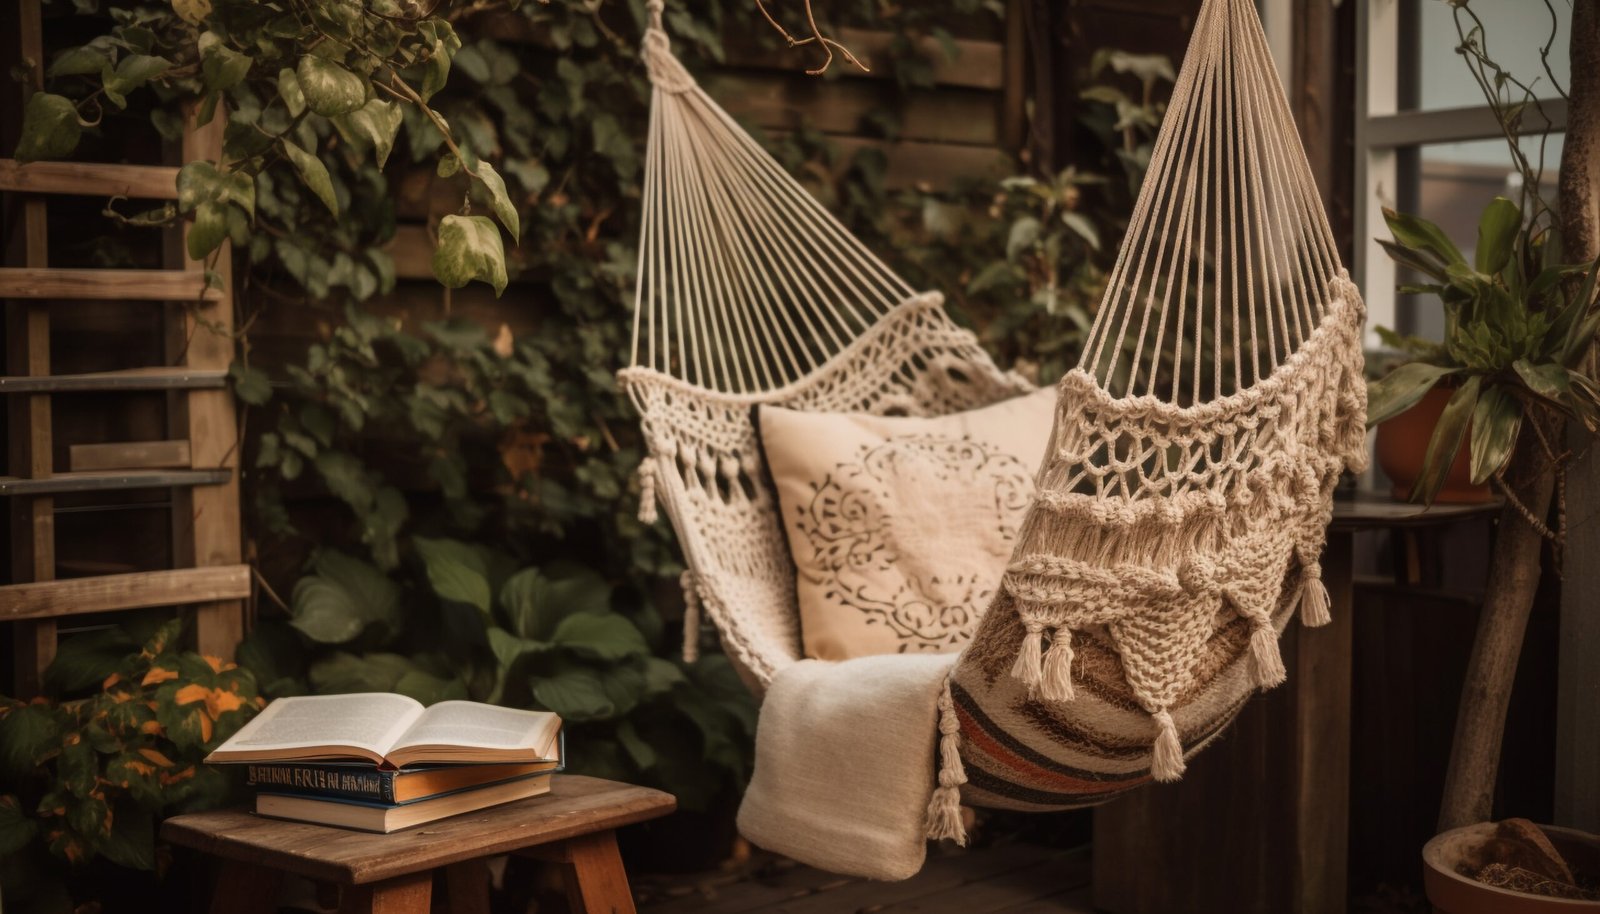 Comfortable pillow on rustic hammock, reading literature in tranquil nature.